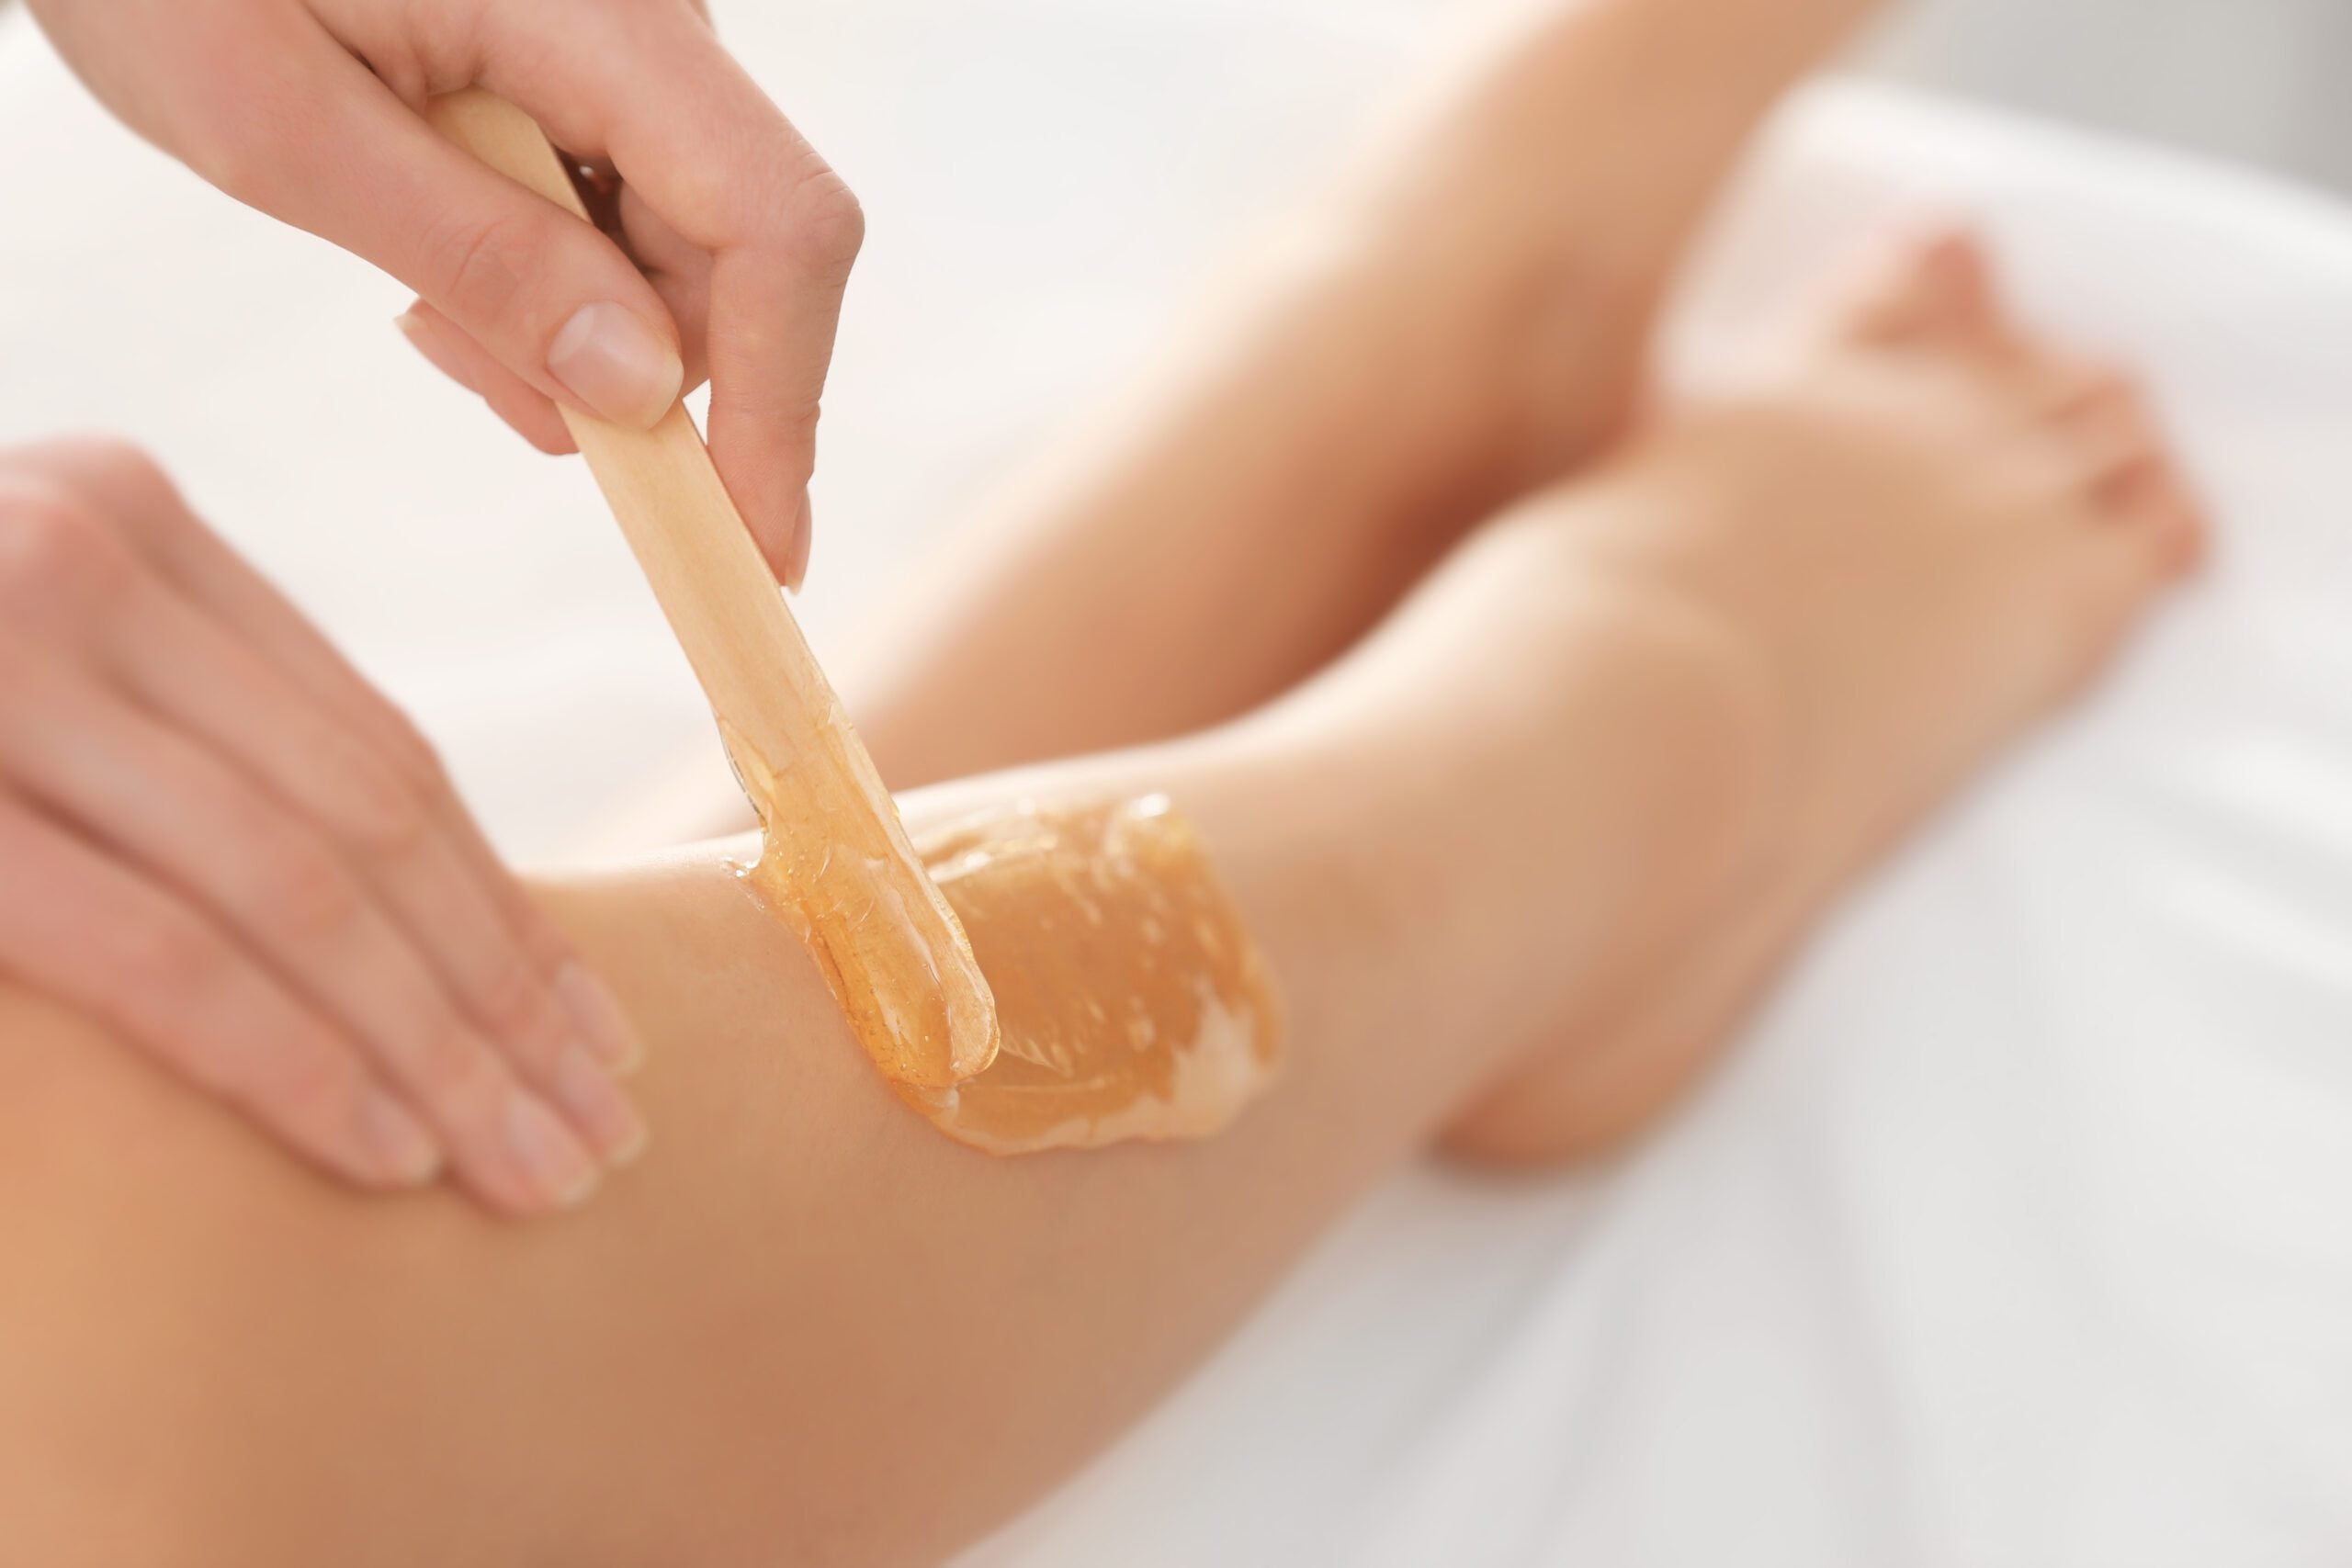 The Best Ways to Prepare Your Skin for Waxing